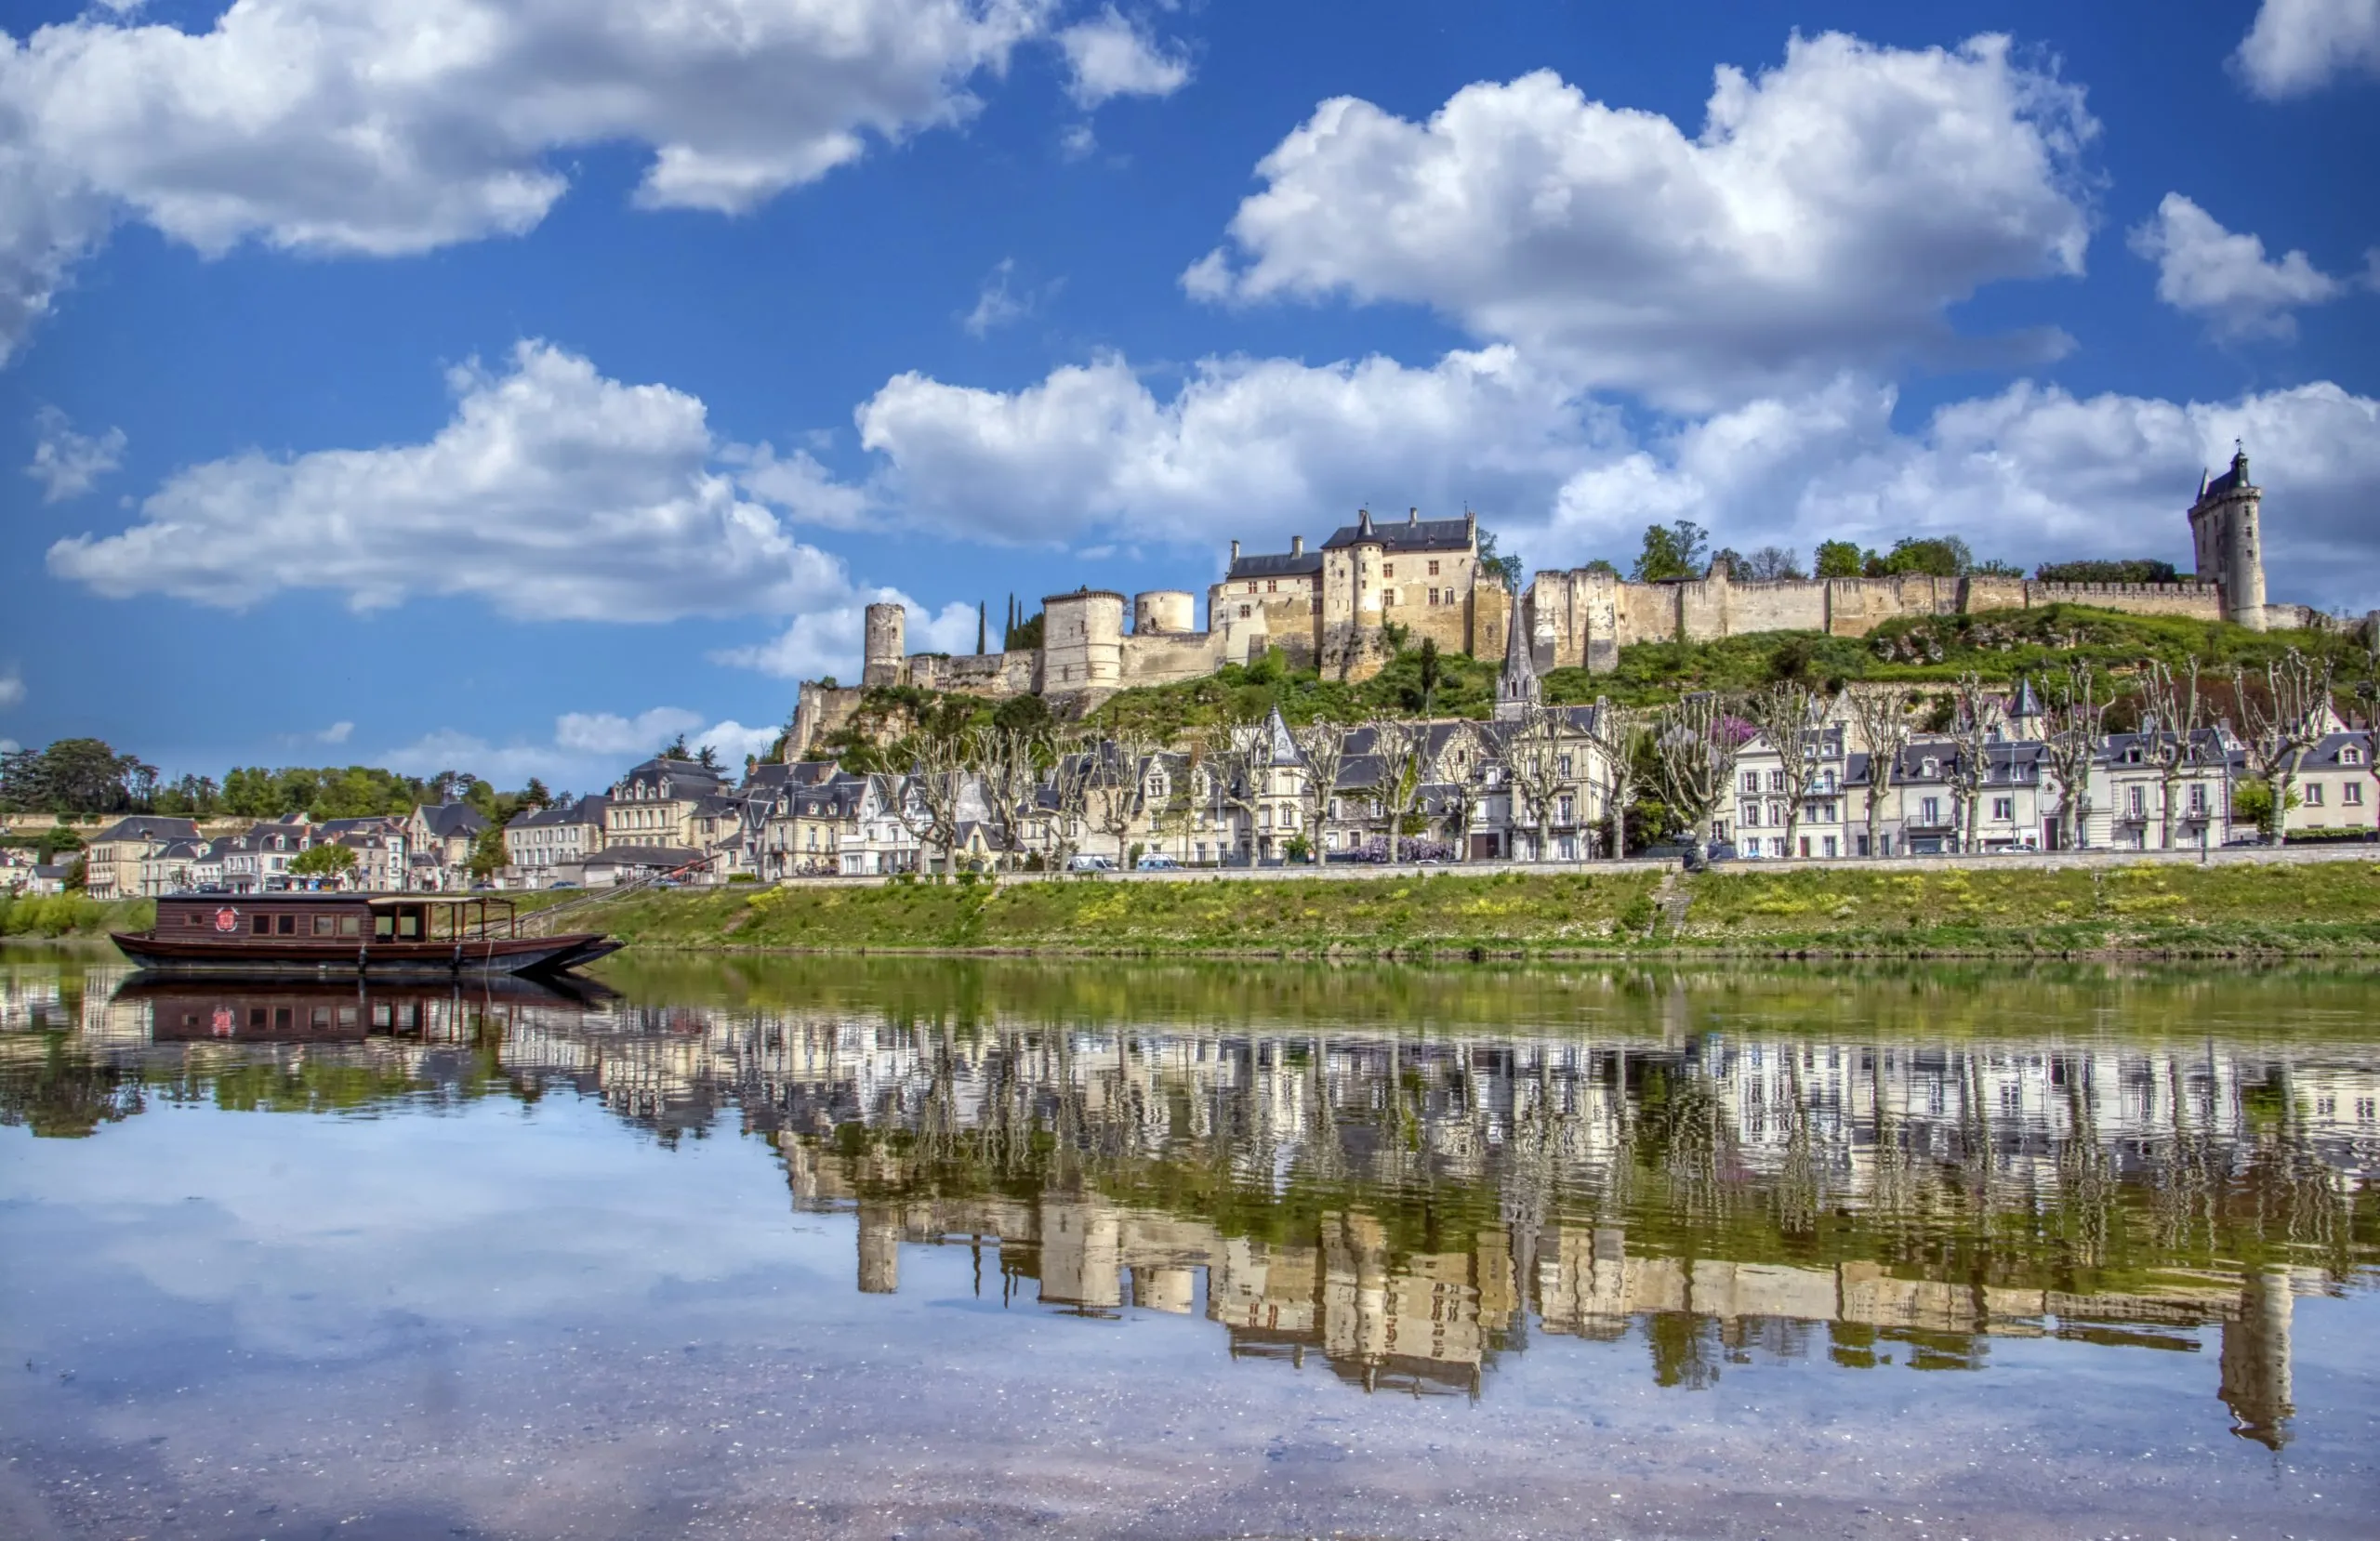 Panoramic view of the city of Chinon with royal castle.